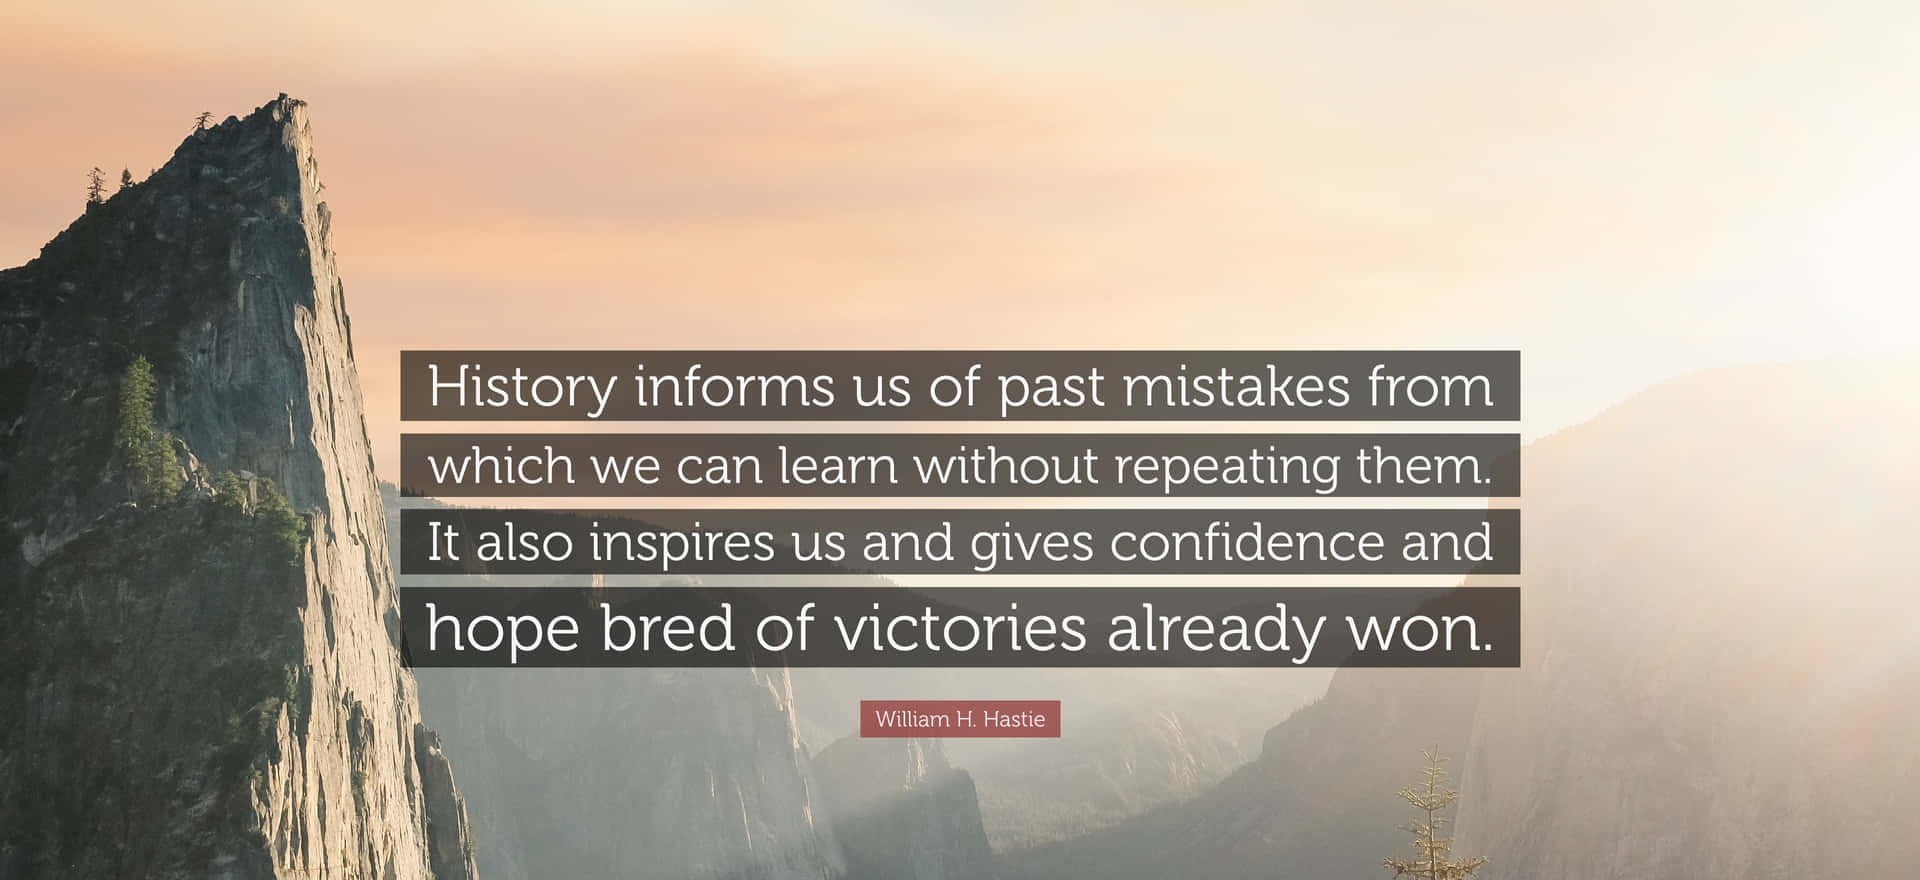 Inspirational Moment - Historical Quote Wallpaper